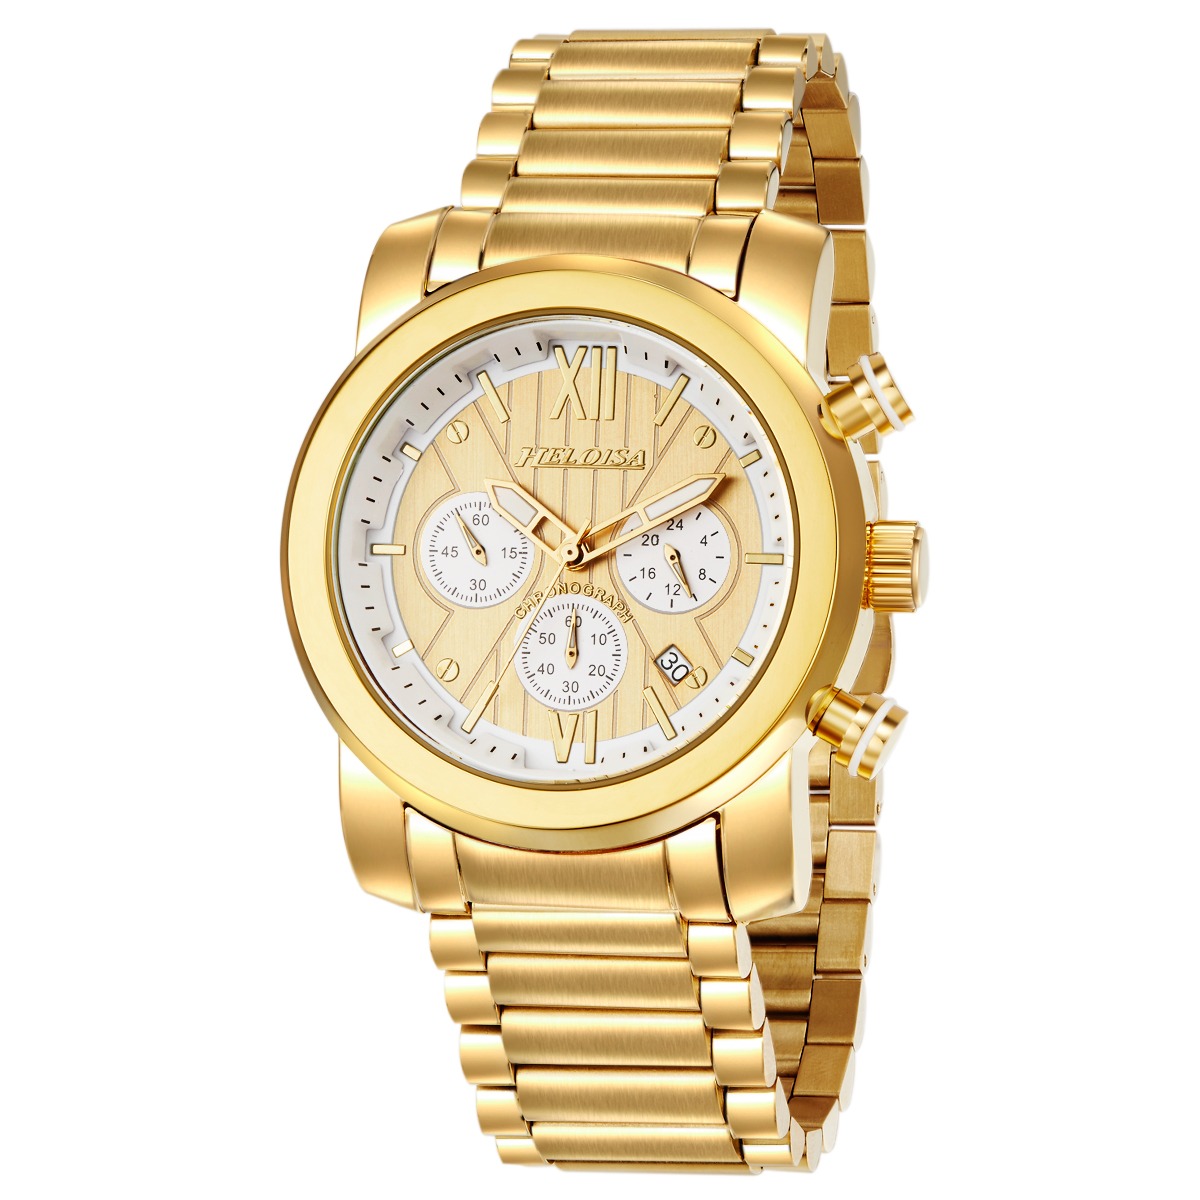 Golden Plated Stainless Steel with Golden Dial Chronos Watch For Men ...